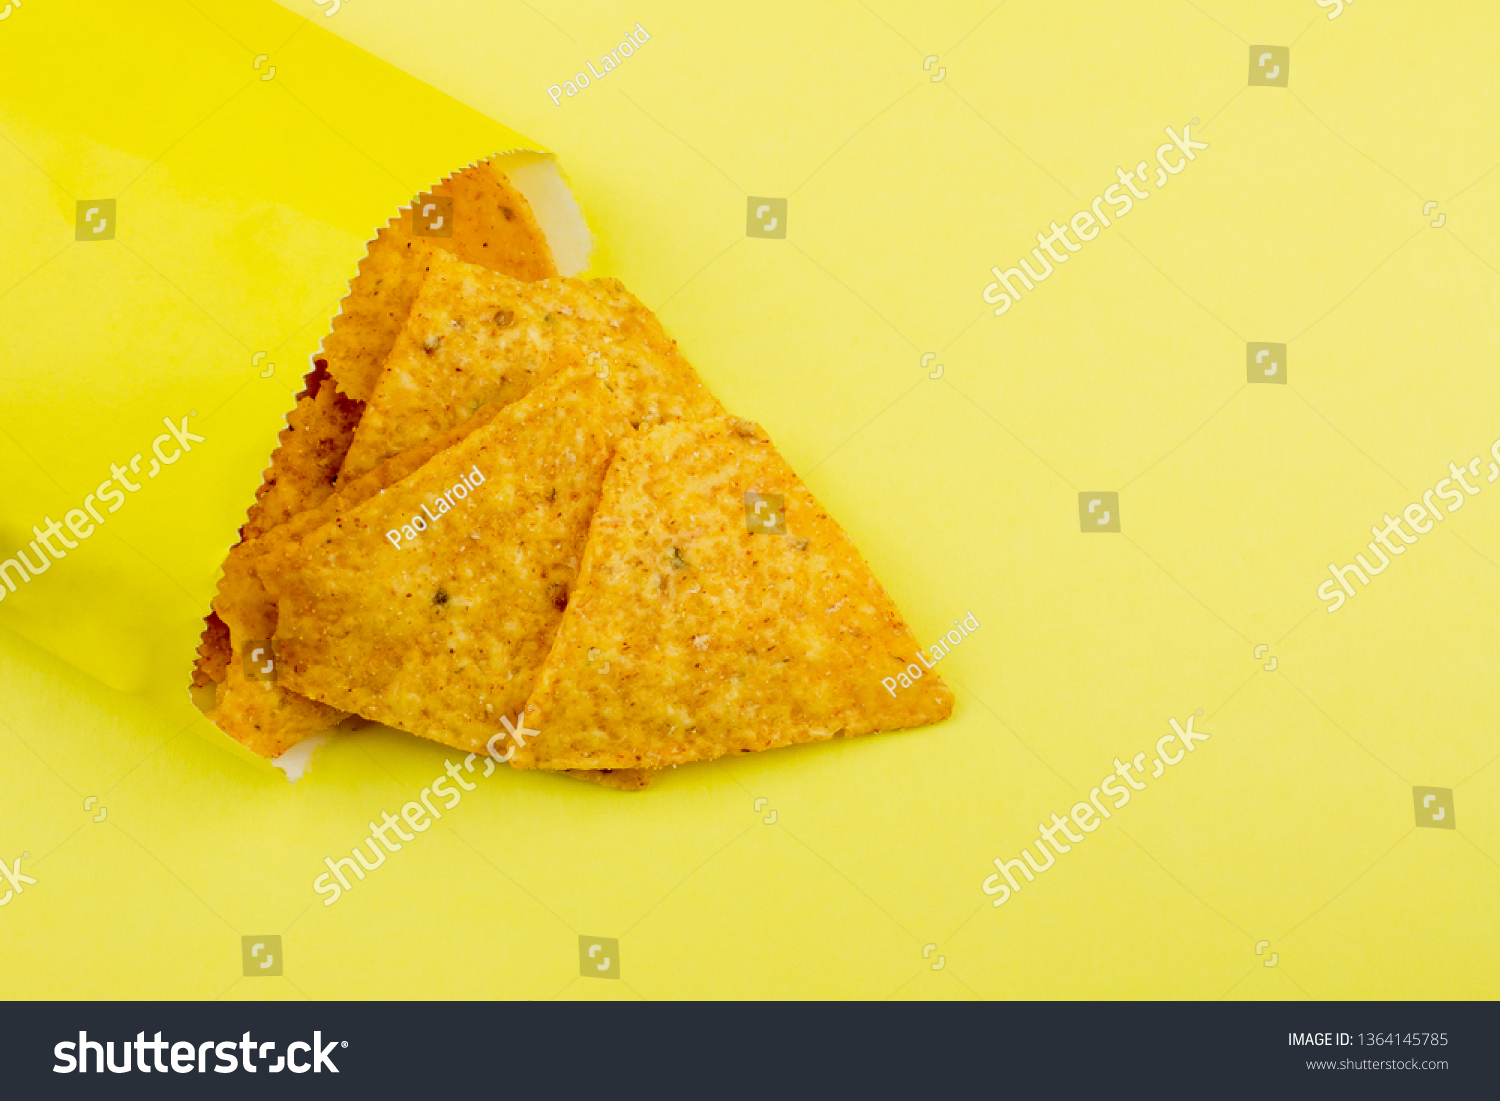 Download Nachos Chips On Yellow Paper Background Stock Photo Edit Now 1364145785 PSD Mockup Templates